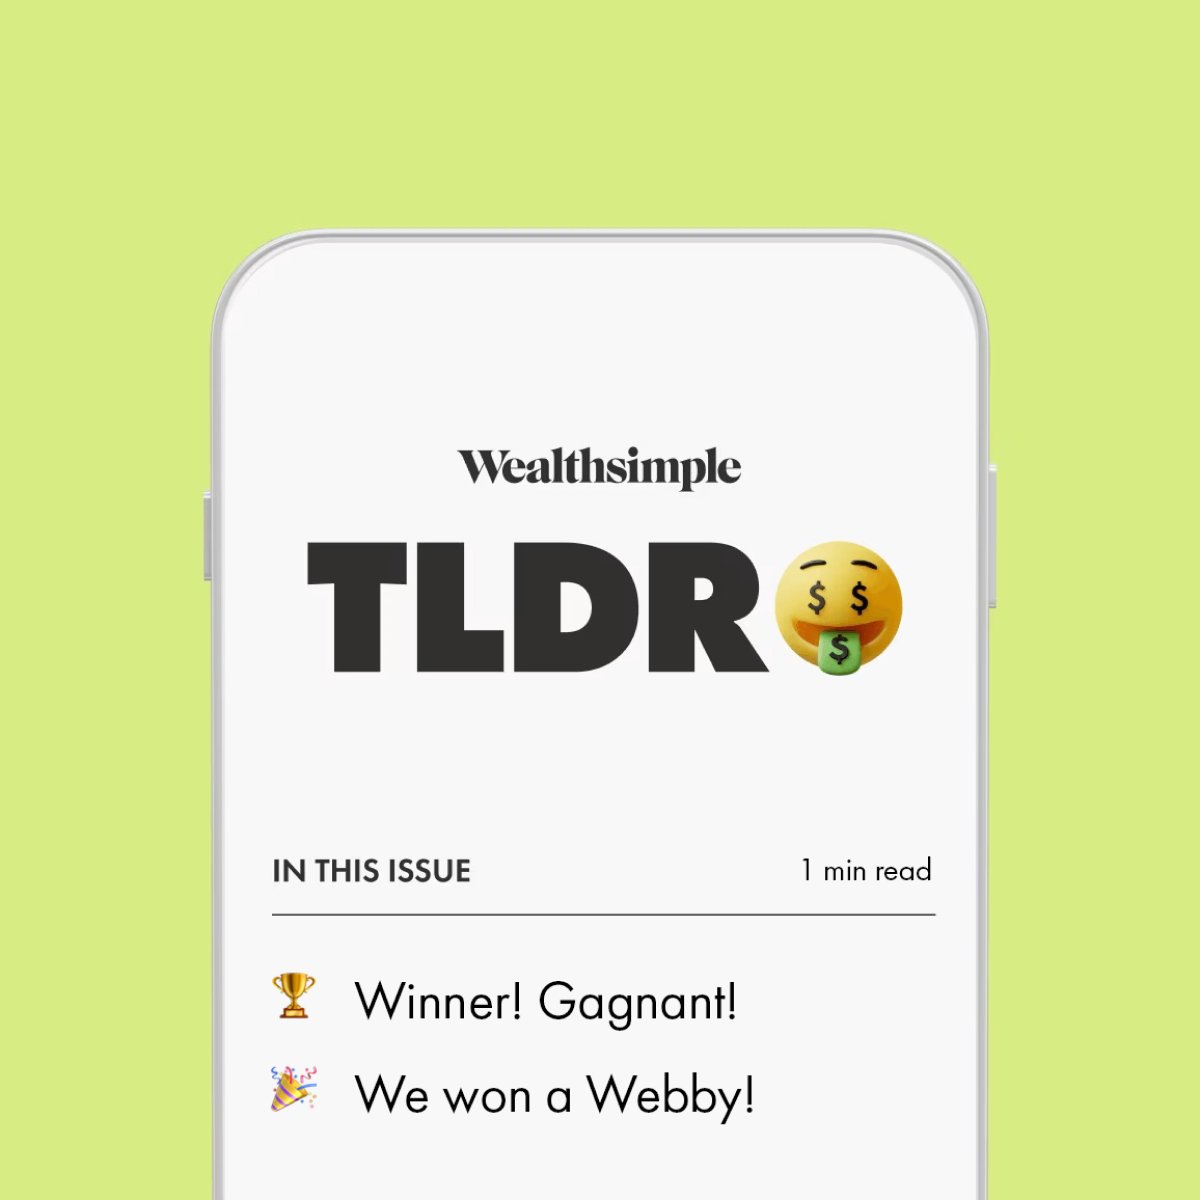 According to the internet, TLDR is the best email newsletter for business, news, and tech! Thanks, @TheWebbyAwards. Check it out and subscribe at wealthsimple.com/tldr